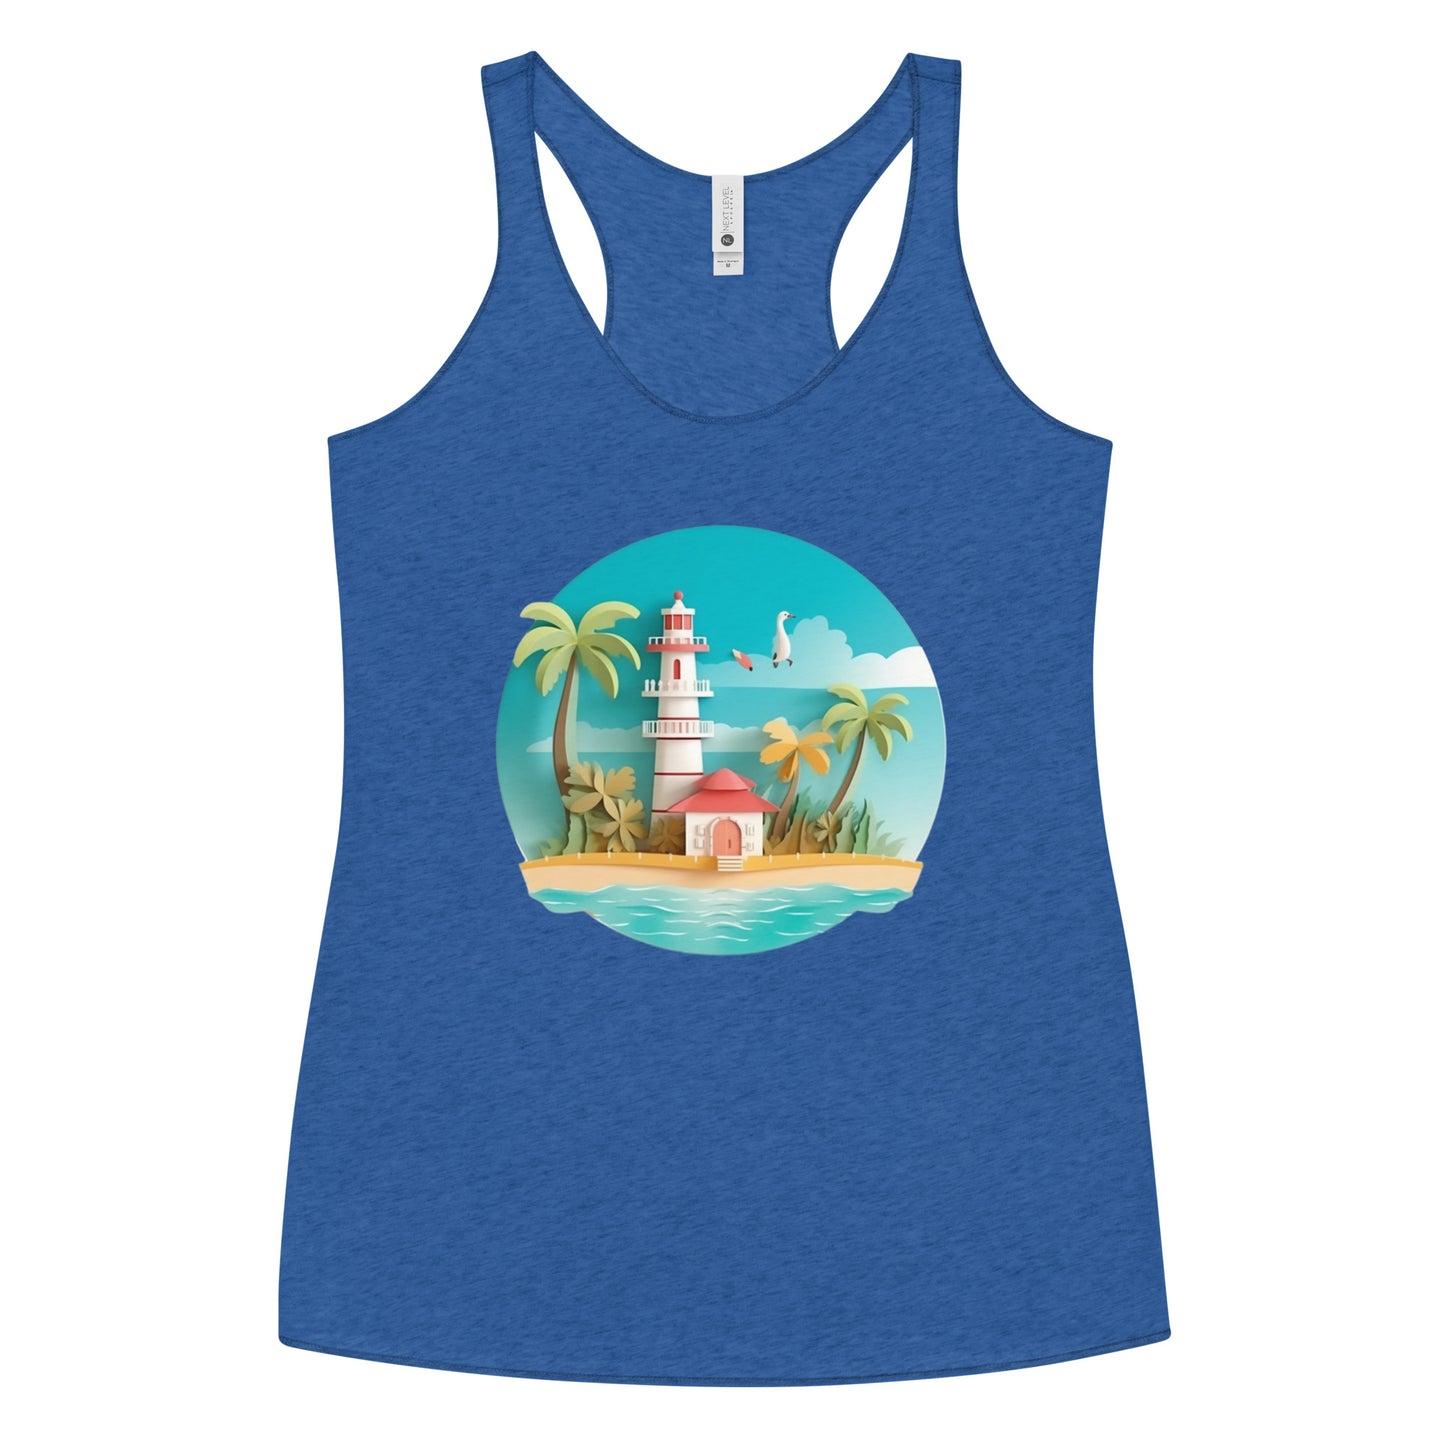 Royal blue tank top with picture of lighthouse and palm trees